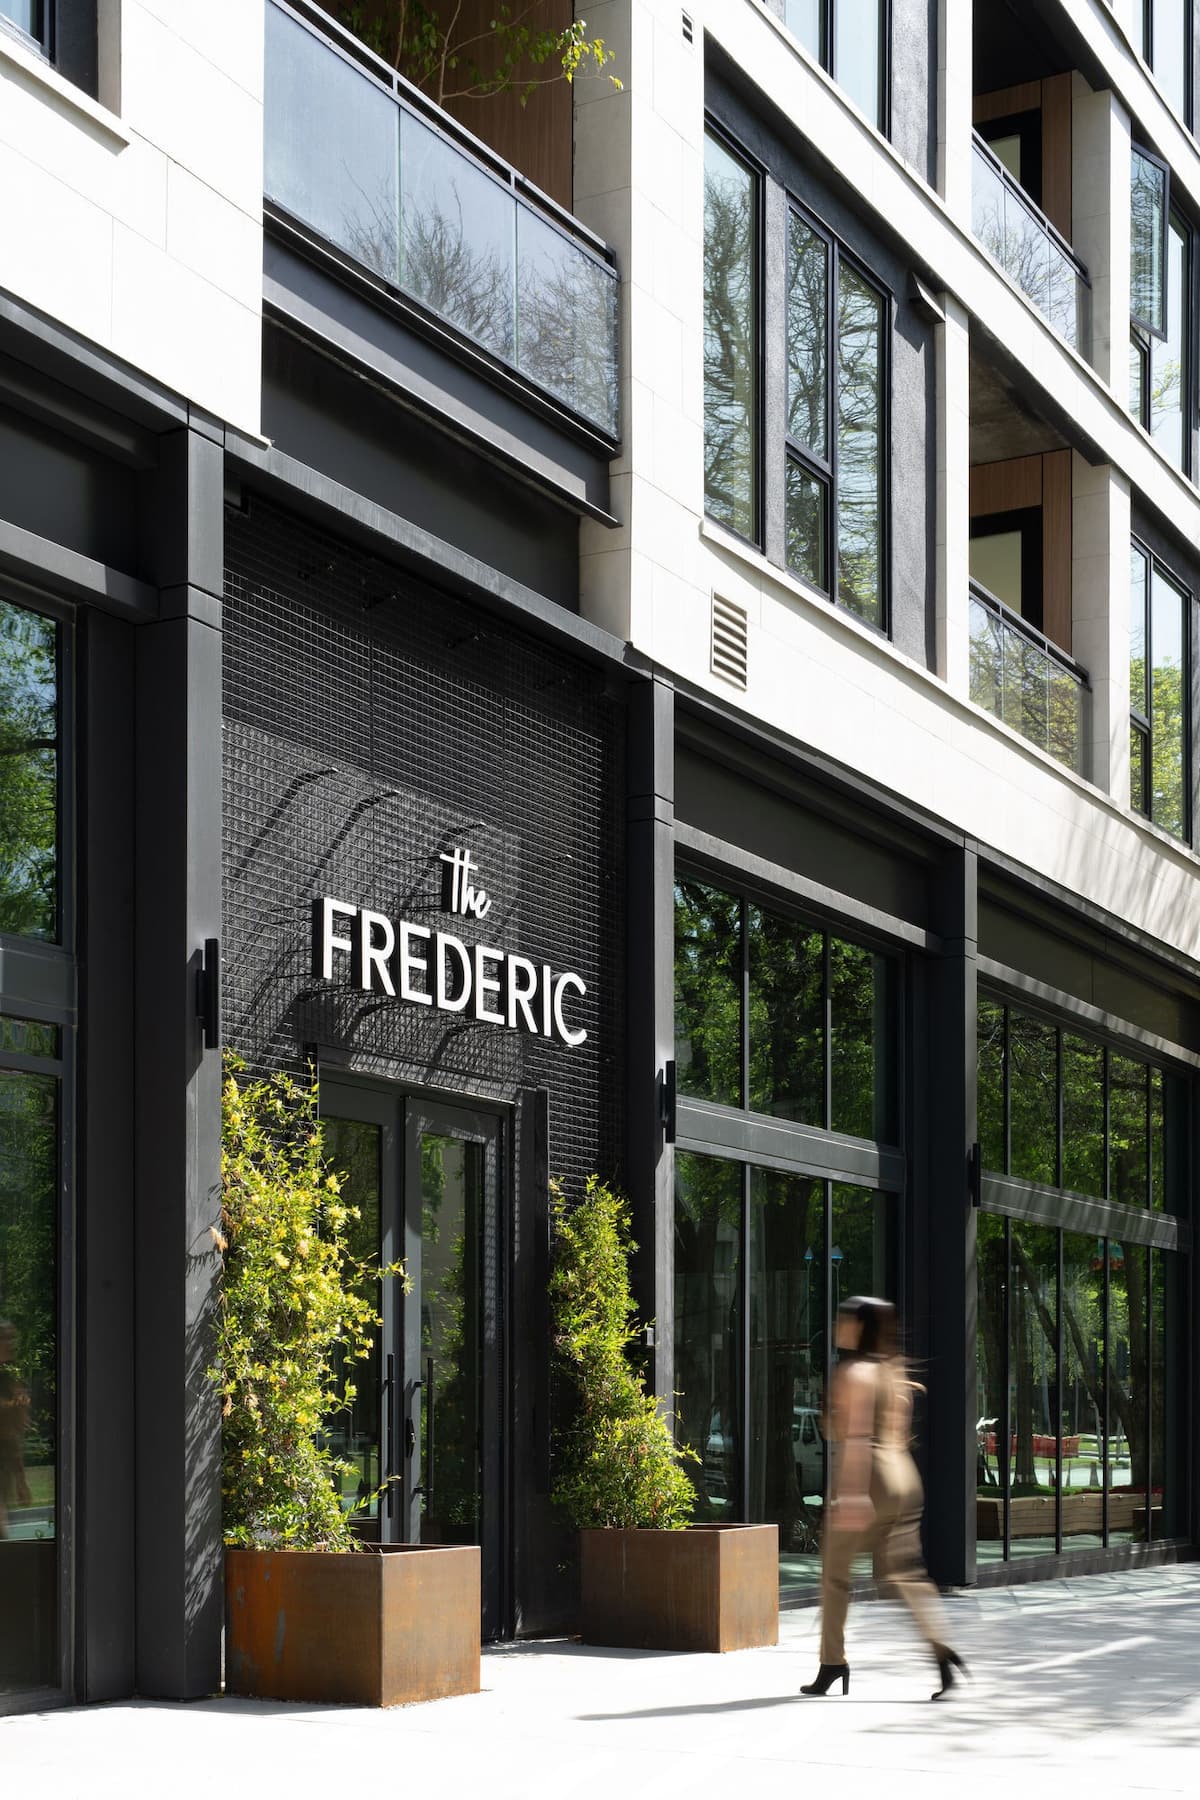 Exterior of The Frederic, an Airbnb-friendly apartment in Sacramento, CA